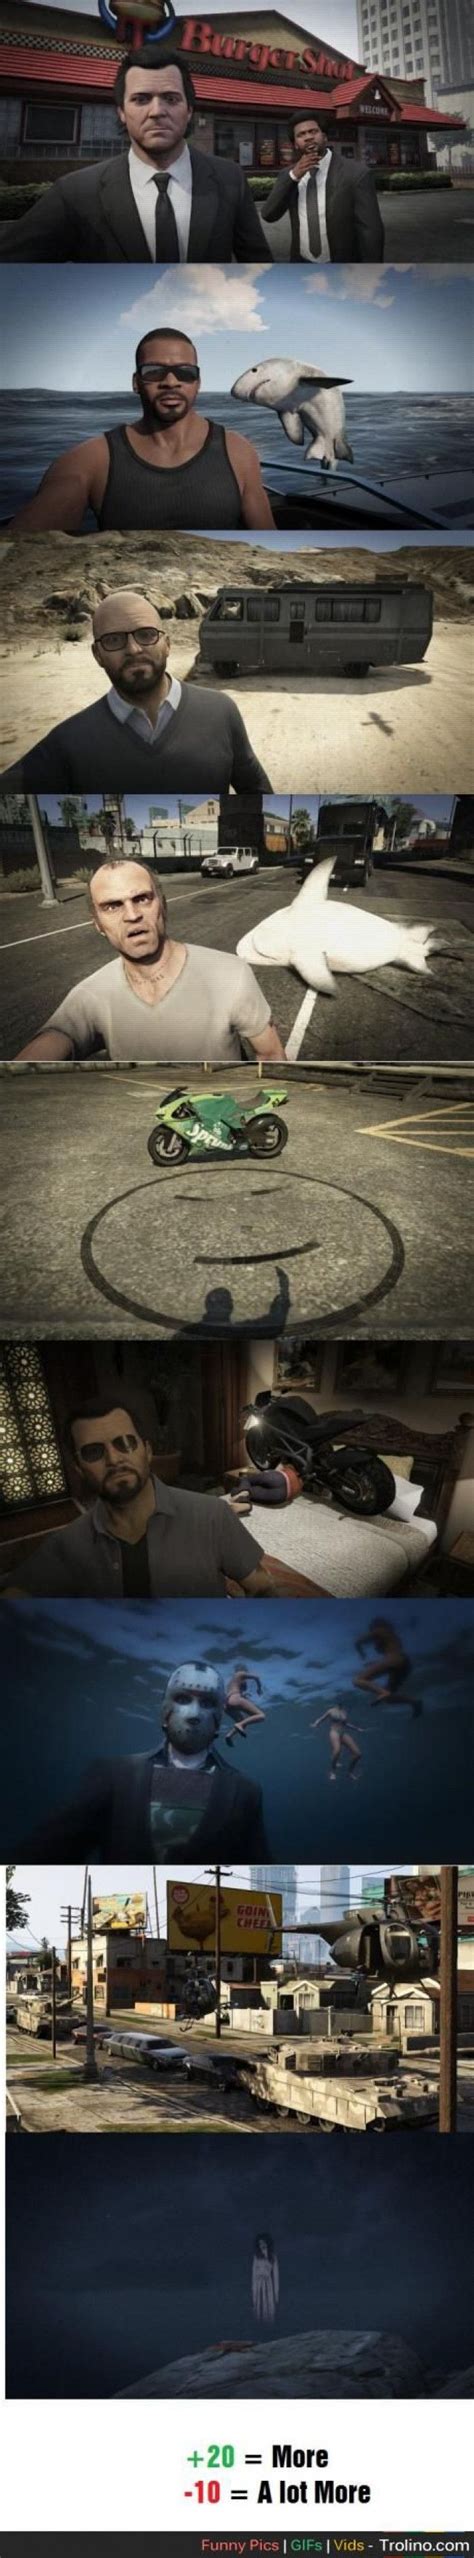 10 Gta V Selfies That Show How Fun The Game Can Be Gta Funny Games